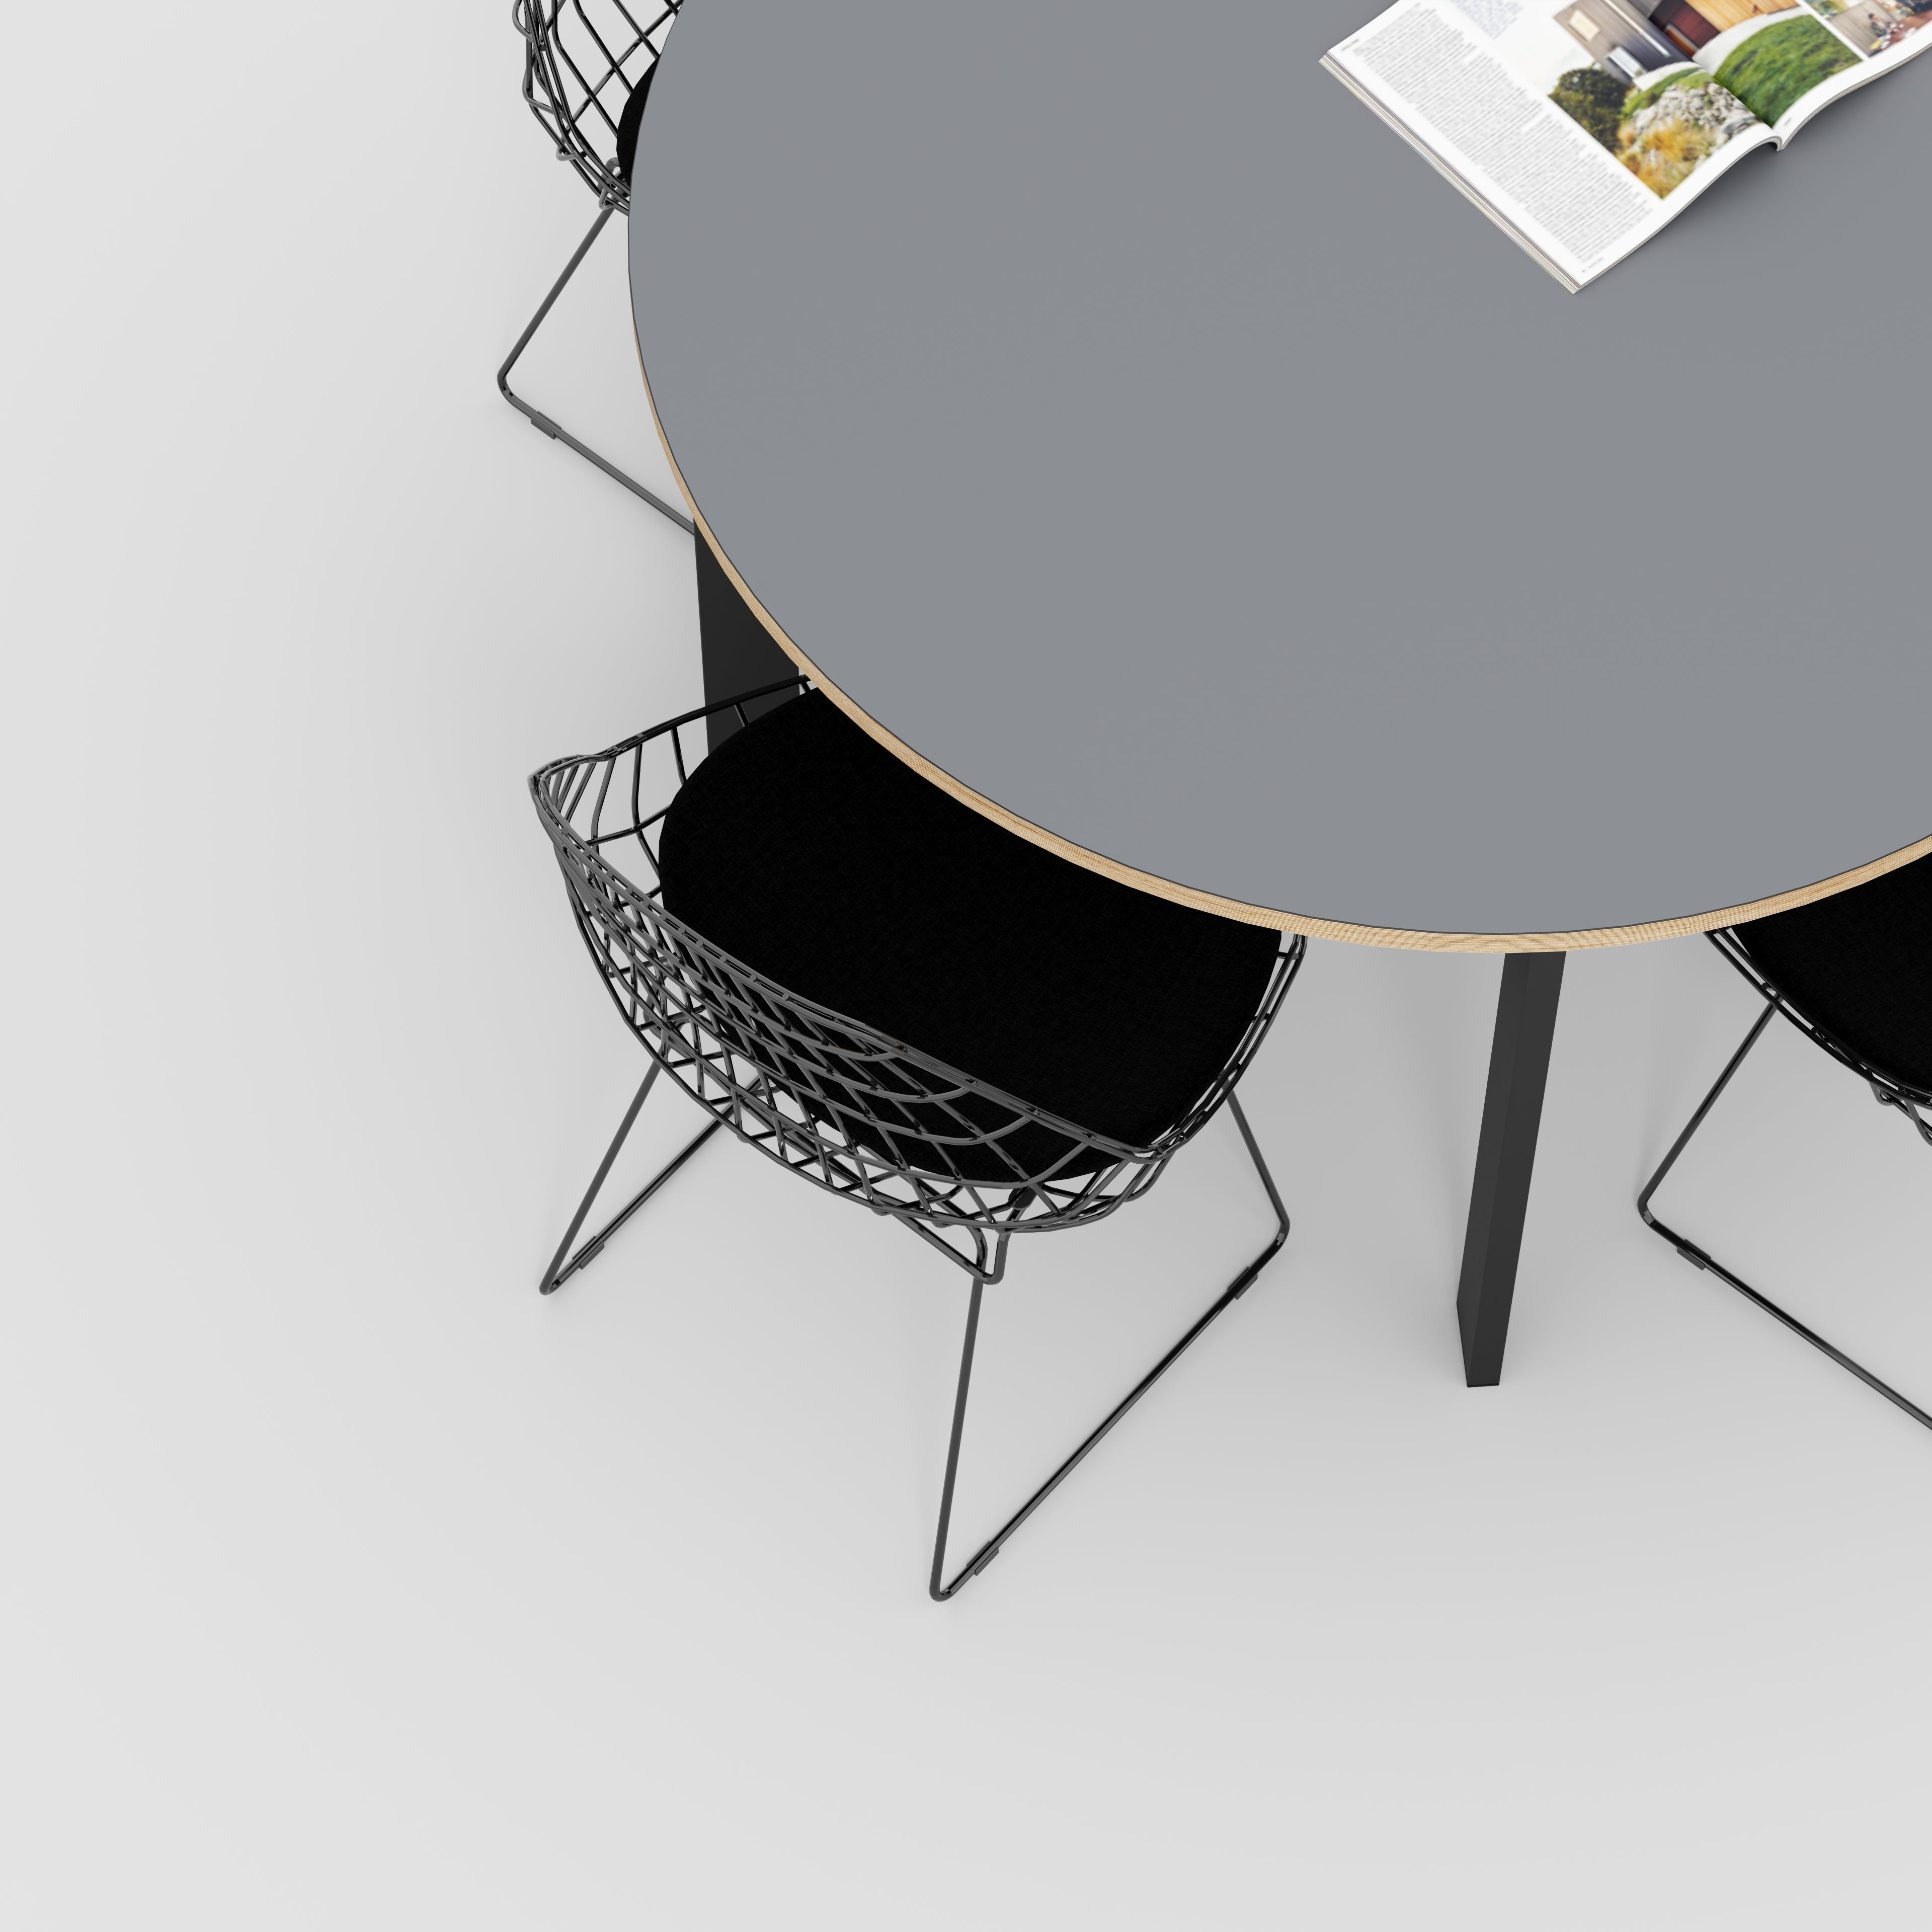 Round Table with Black Rectangular Single Pin Legs - Formica Tornado Grey - 1200(dia) x 735(h)